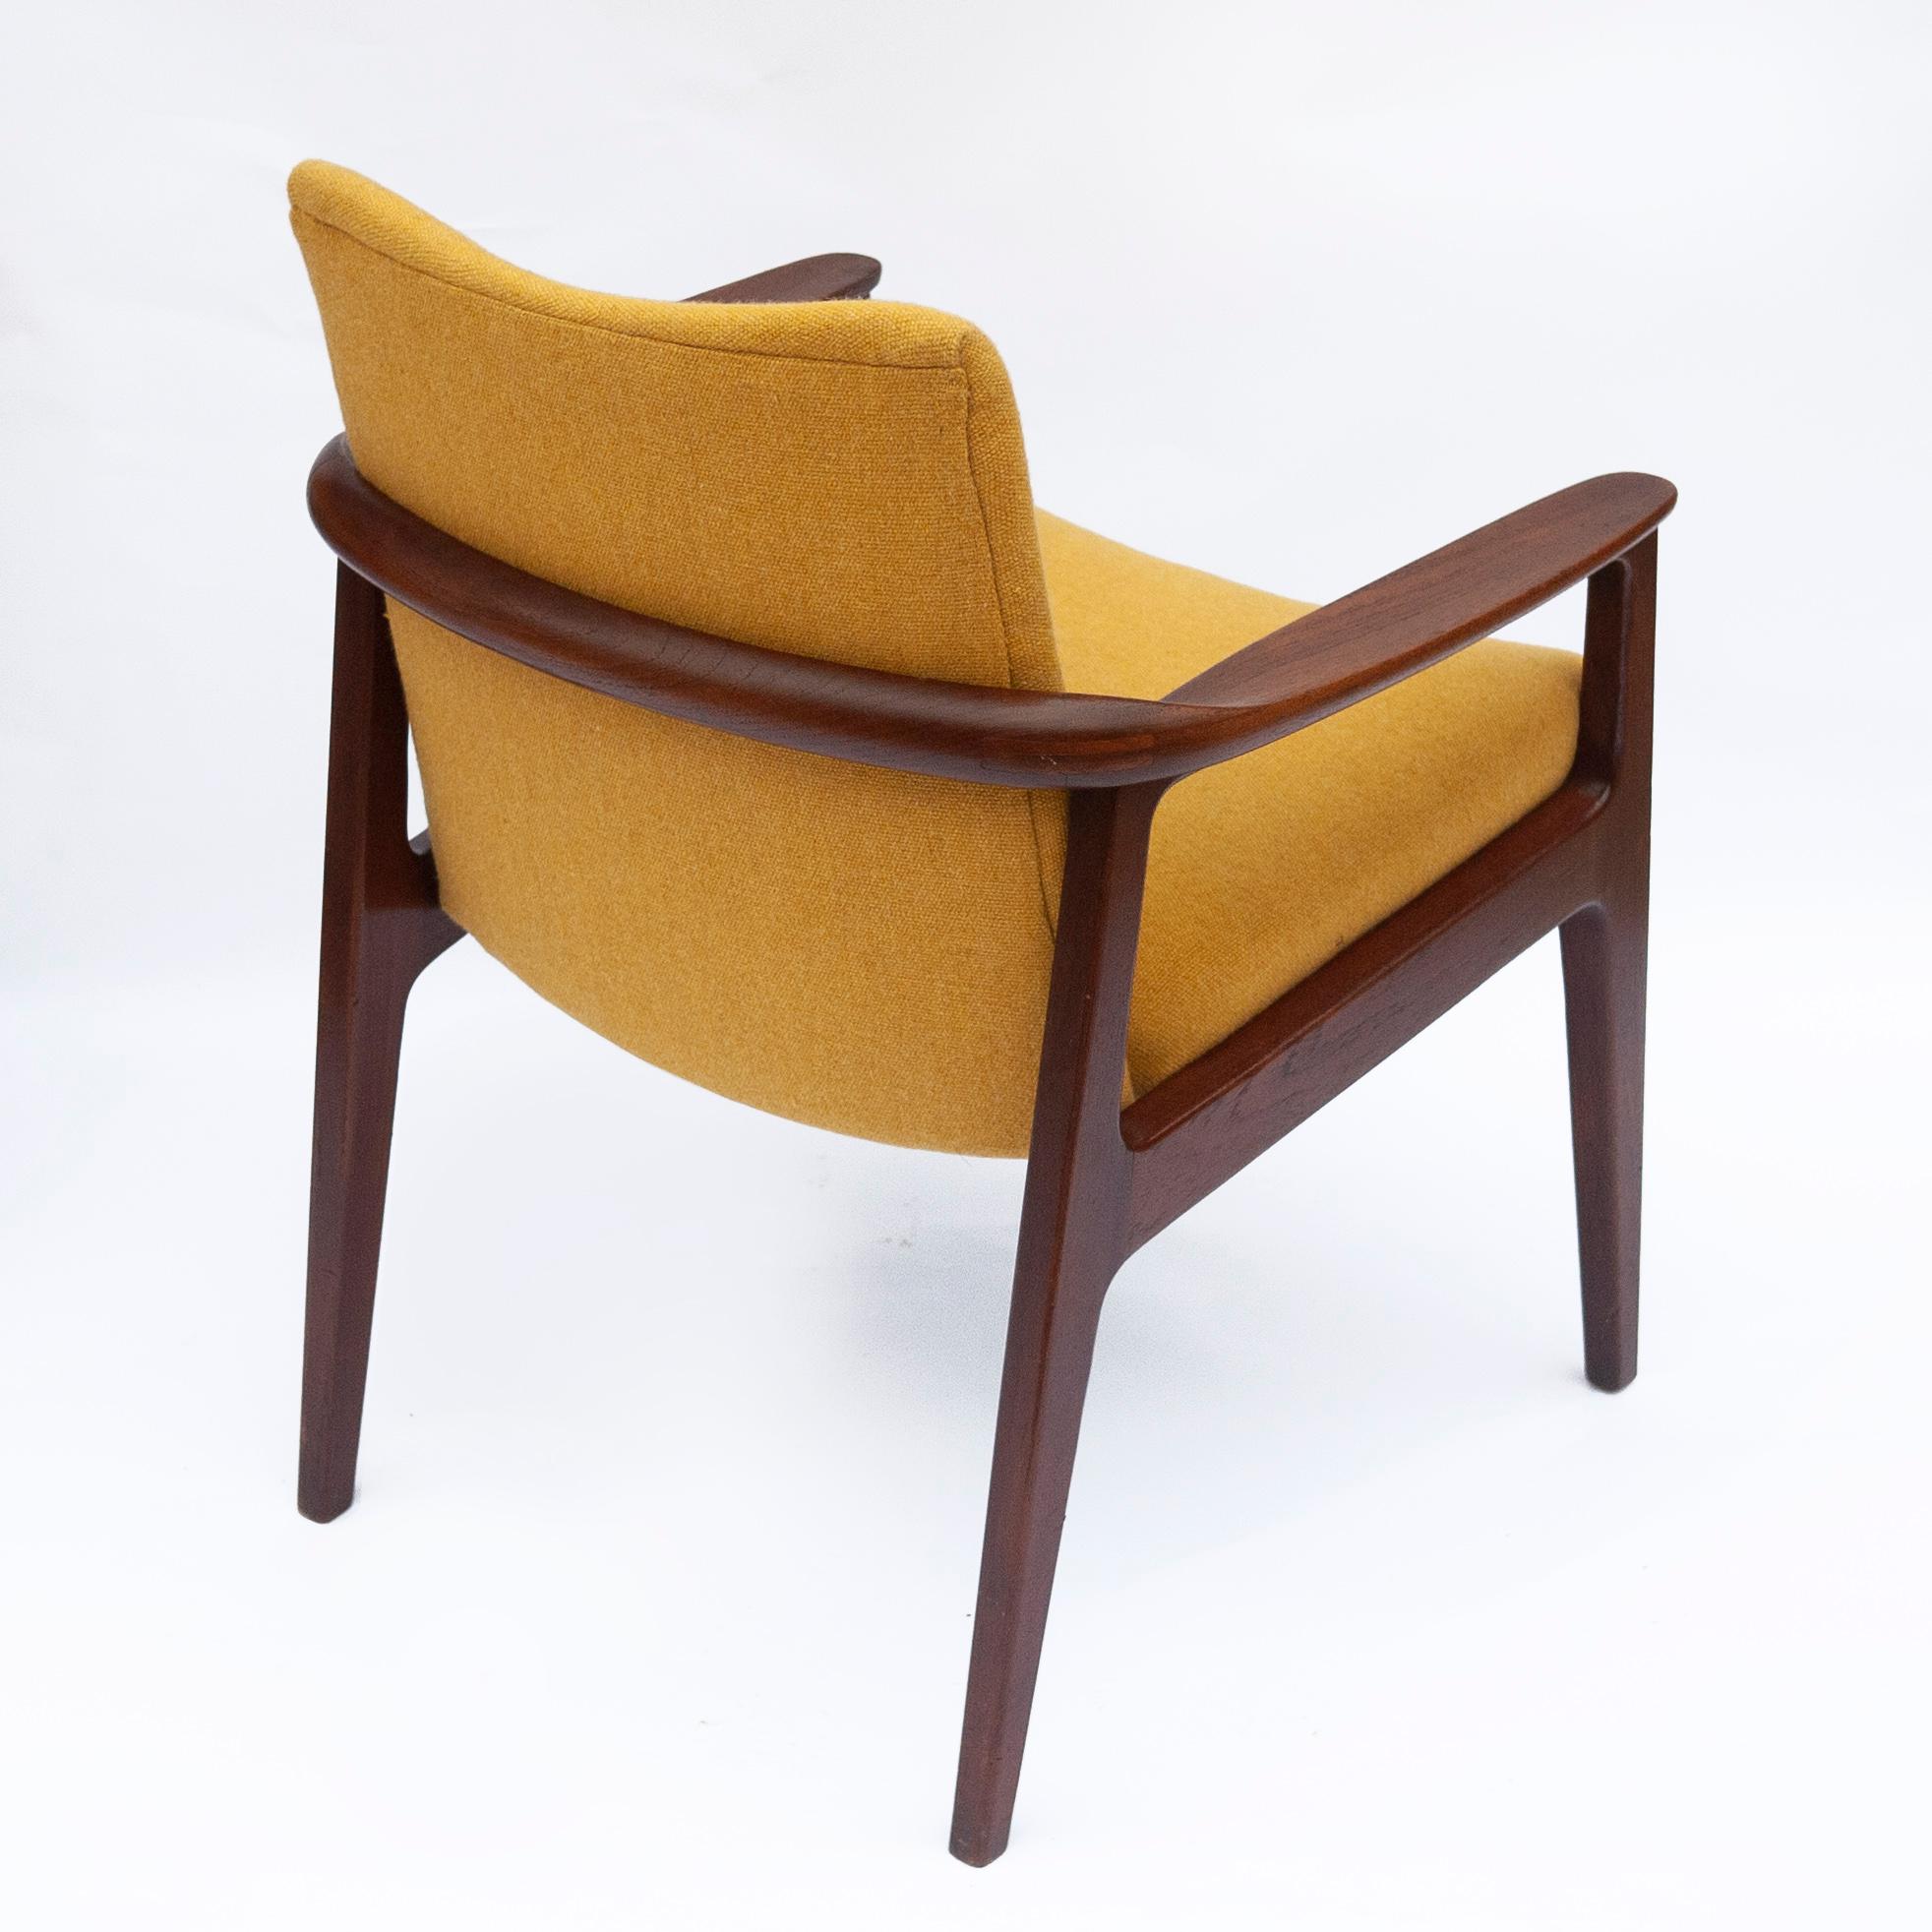 Mid-20th Century Mid-Century Teak Armchair with Yellow Upholstery by Sigvard Bernadotte